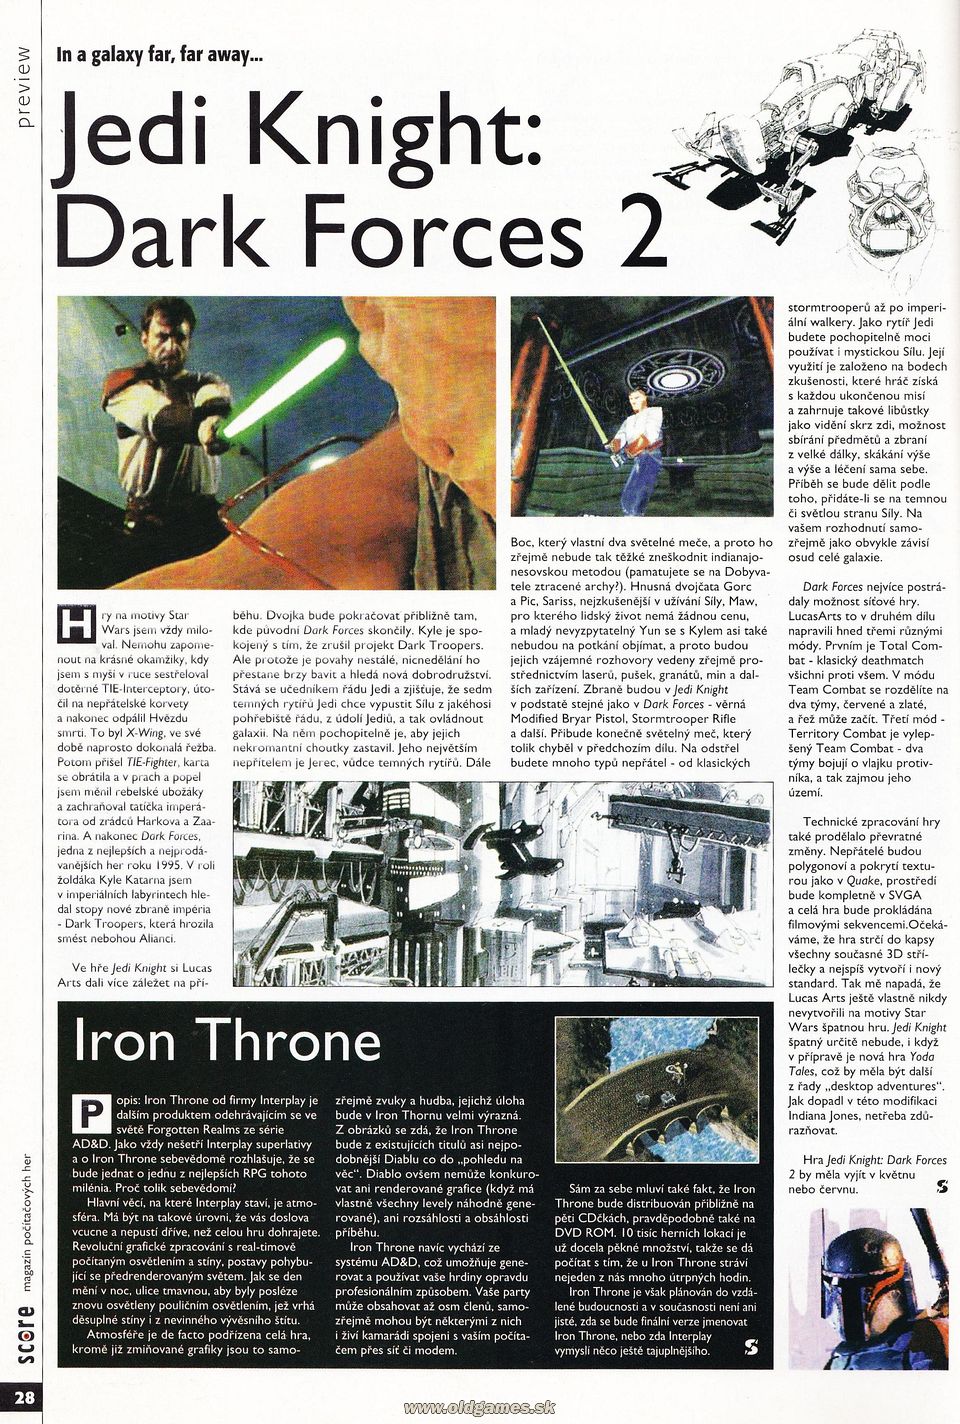 Preview: Jedi Knight: Dark Forces 2